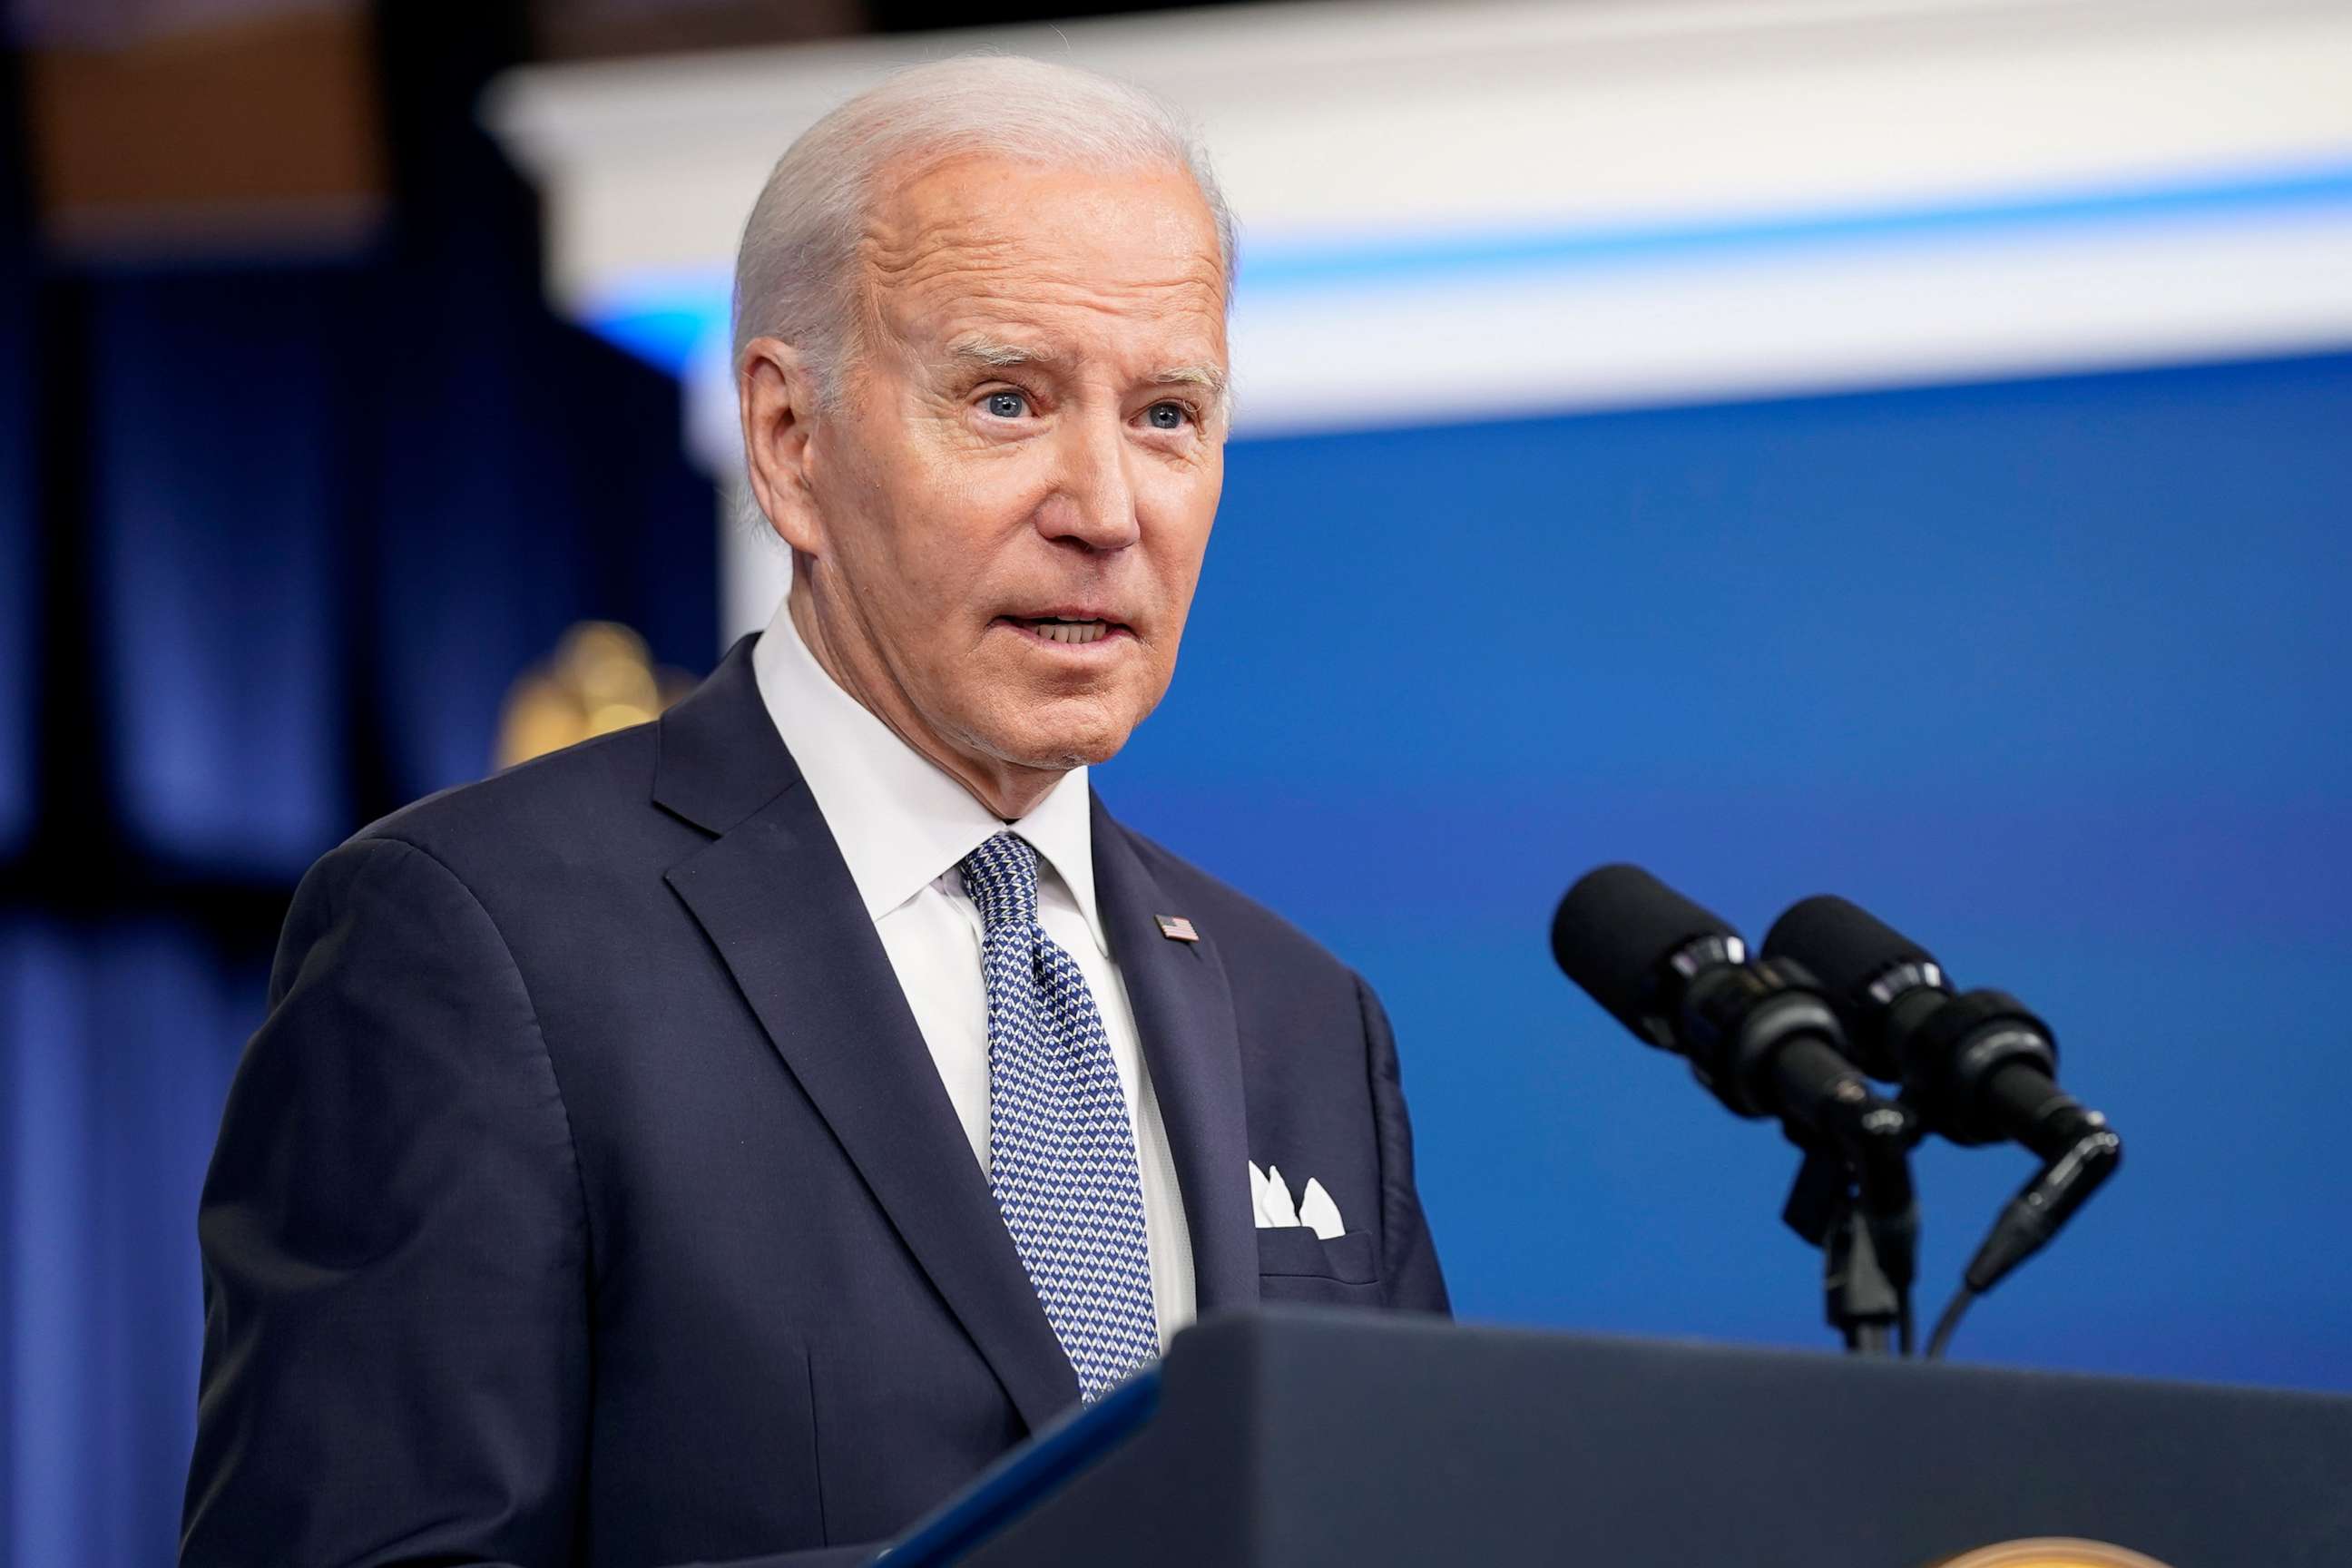 PHOTO: President Joe Biden responds to questions from reporters in the Eisenhower Executive Office Building on the White House Campus, in Washington, D.C., on Jan. 12, 2023.